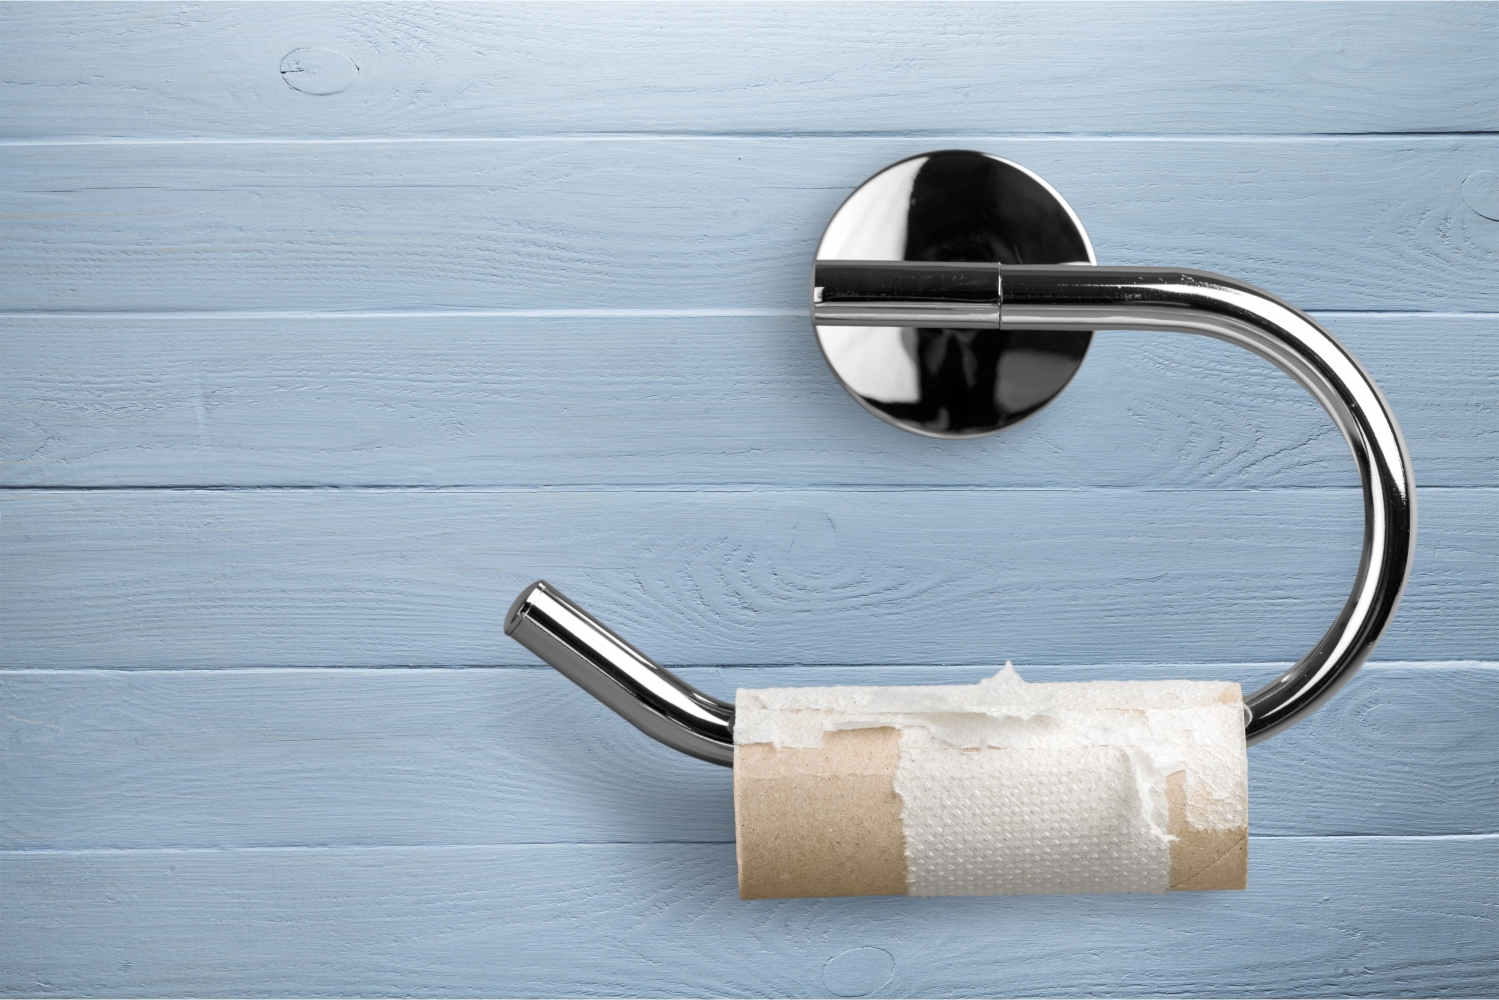 Here' an efficient way to use each roll of toilet paper